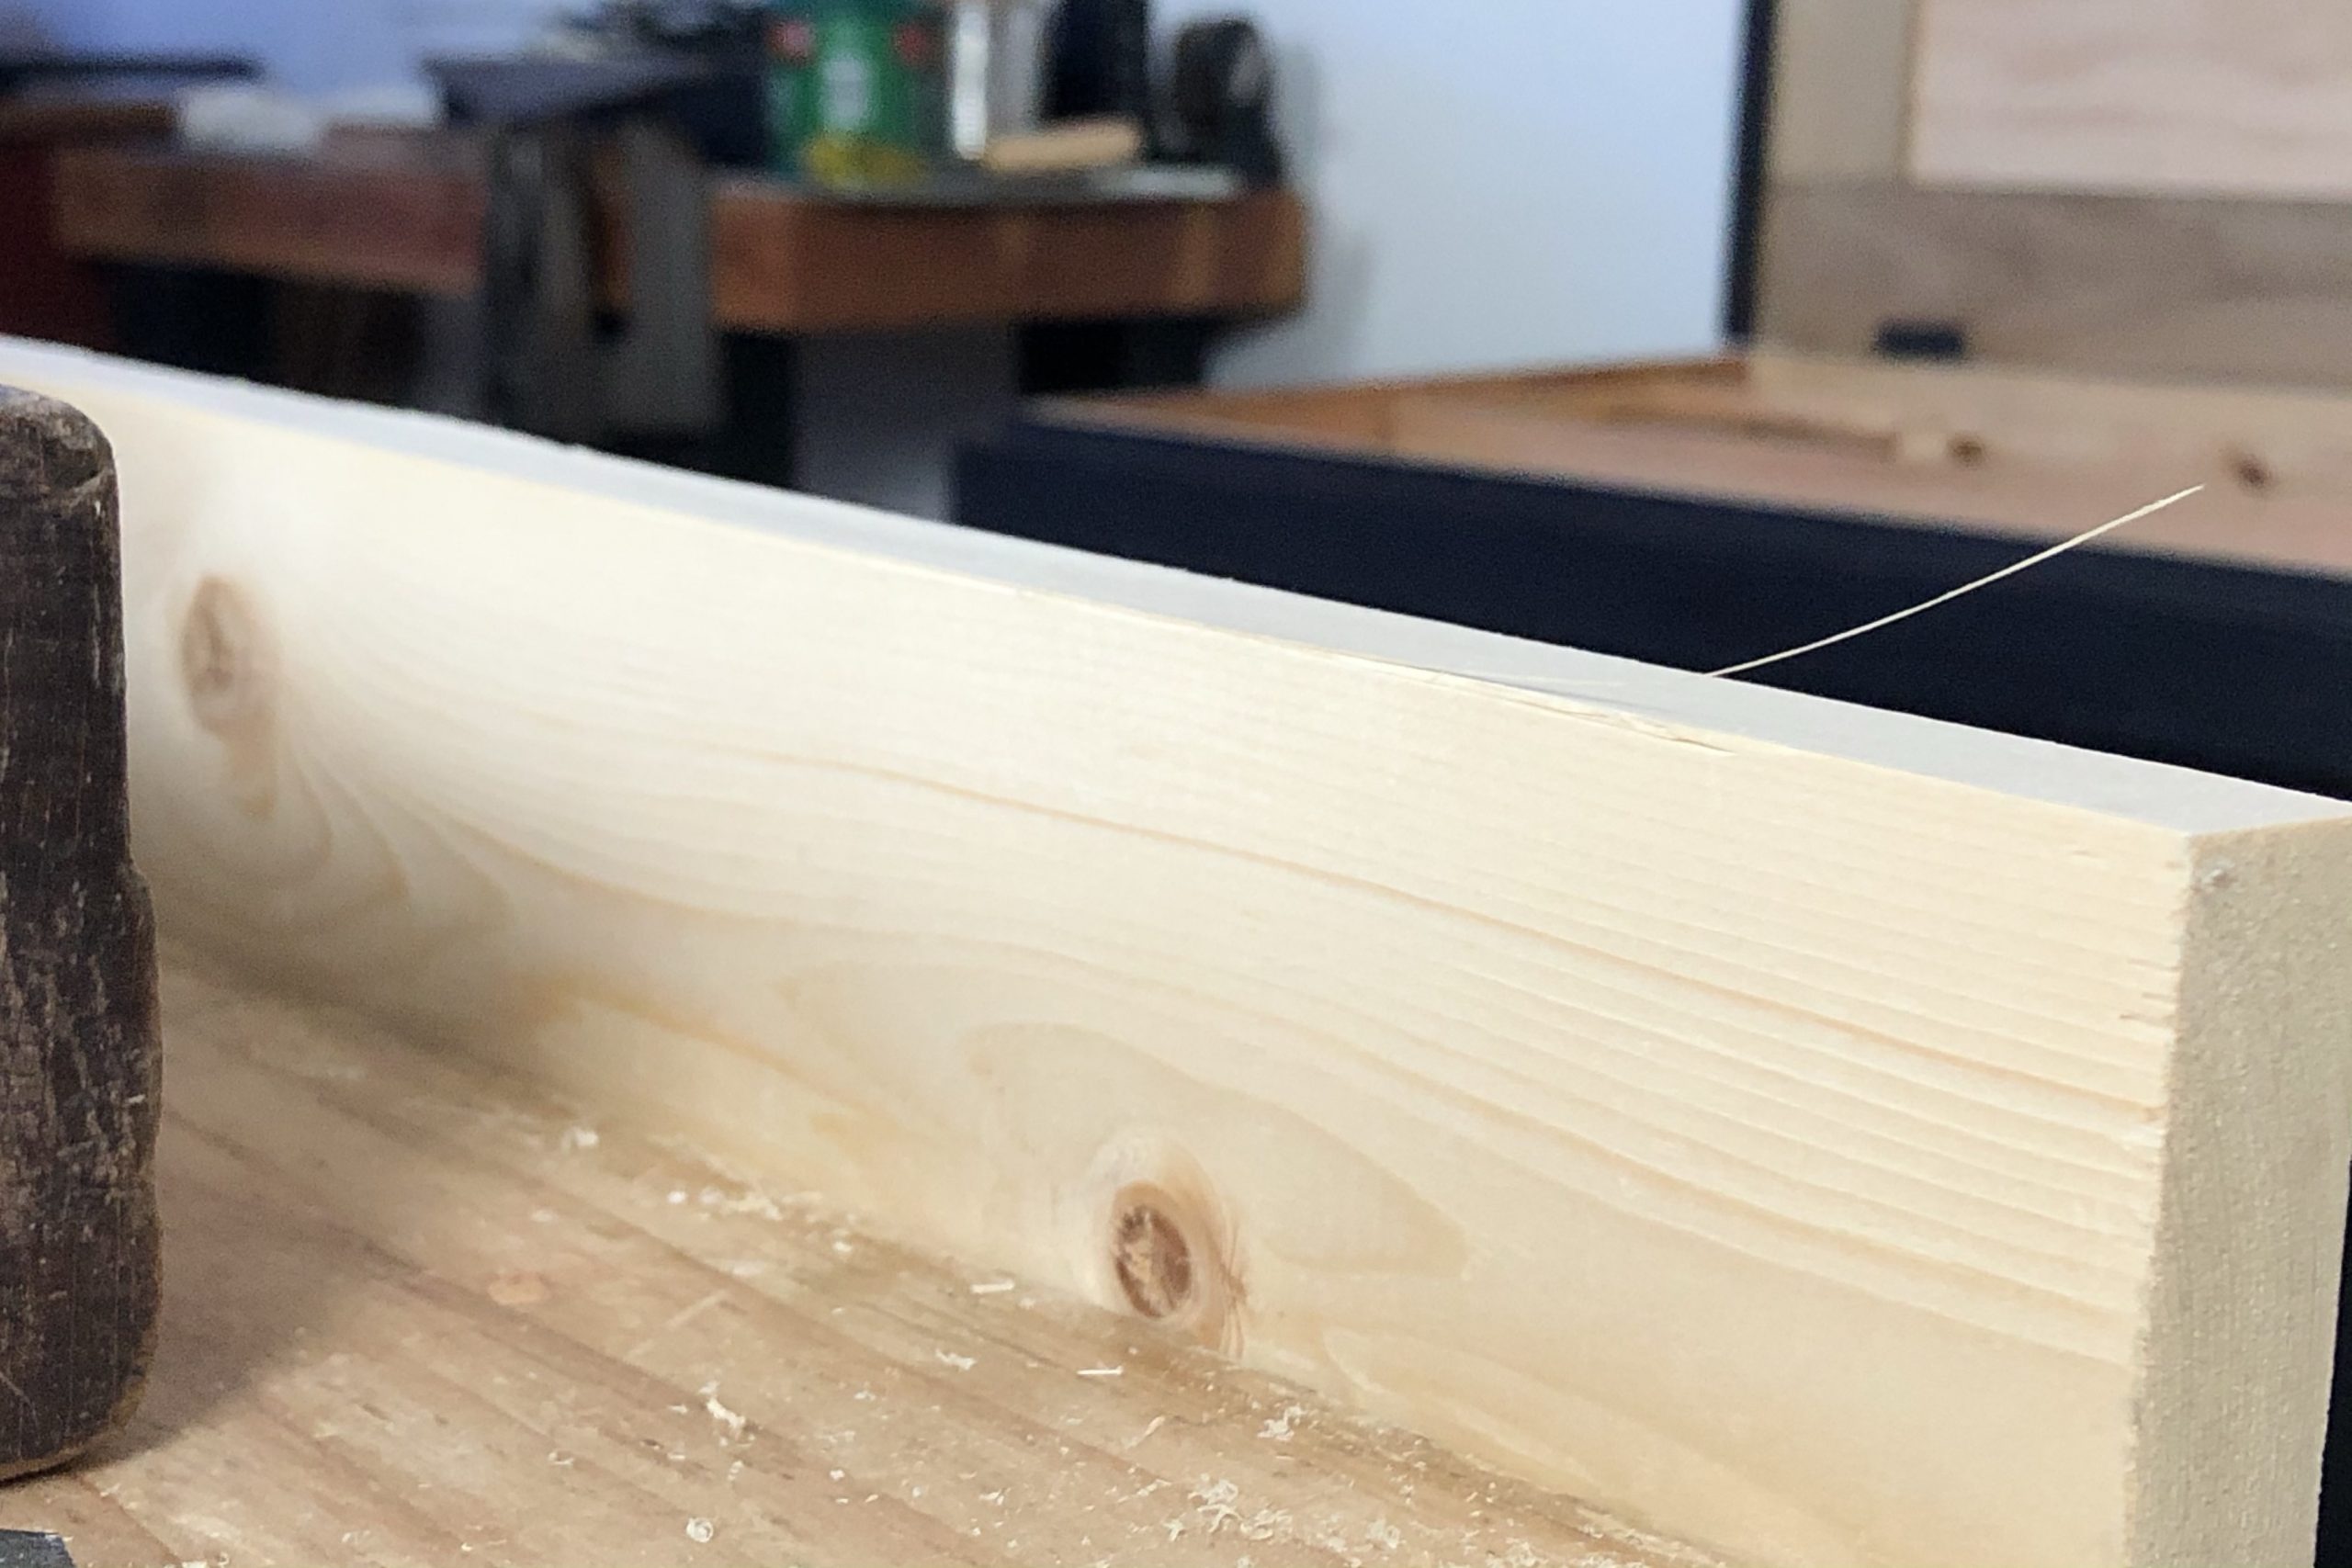 How to Straighten the Edge of a Board with a Hand Plane